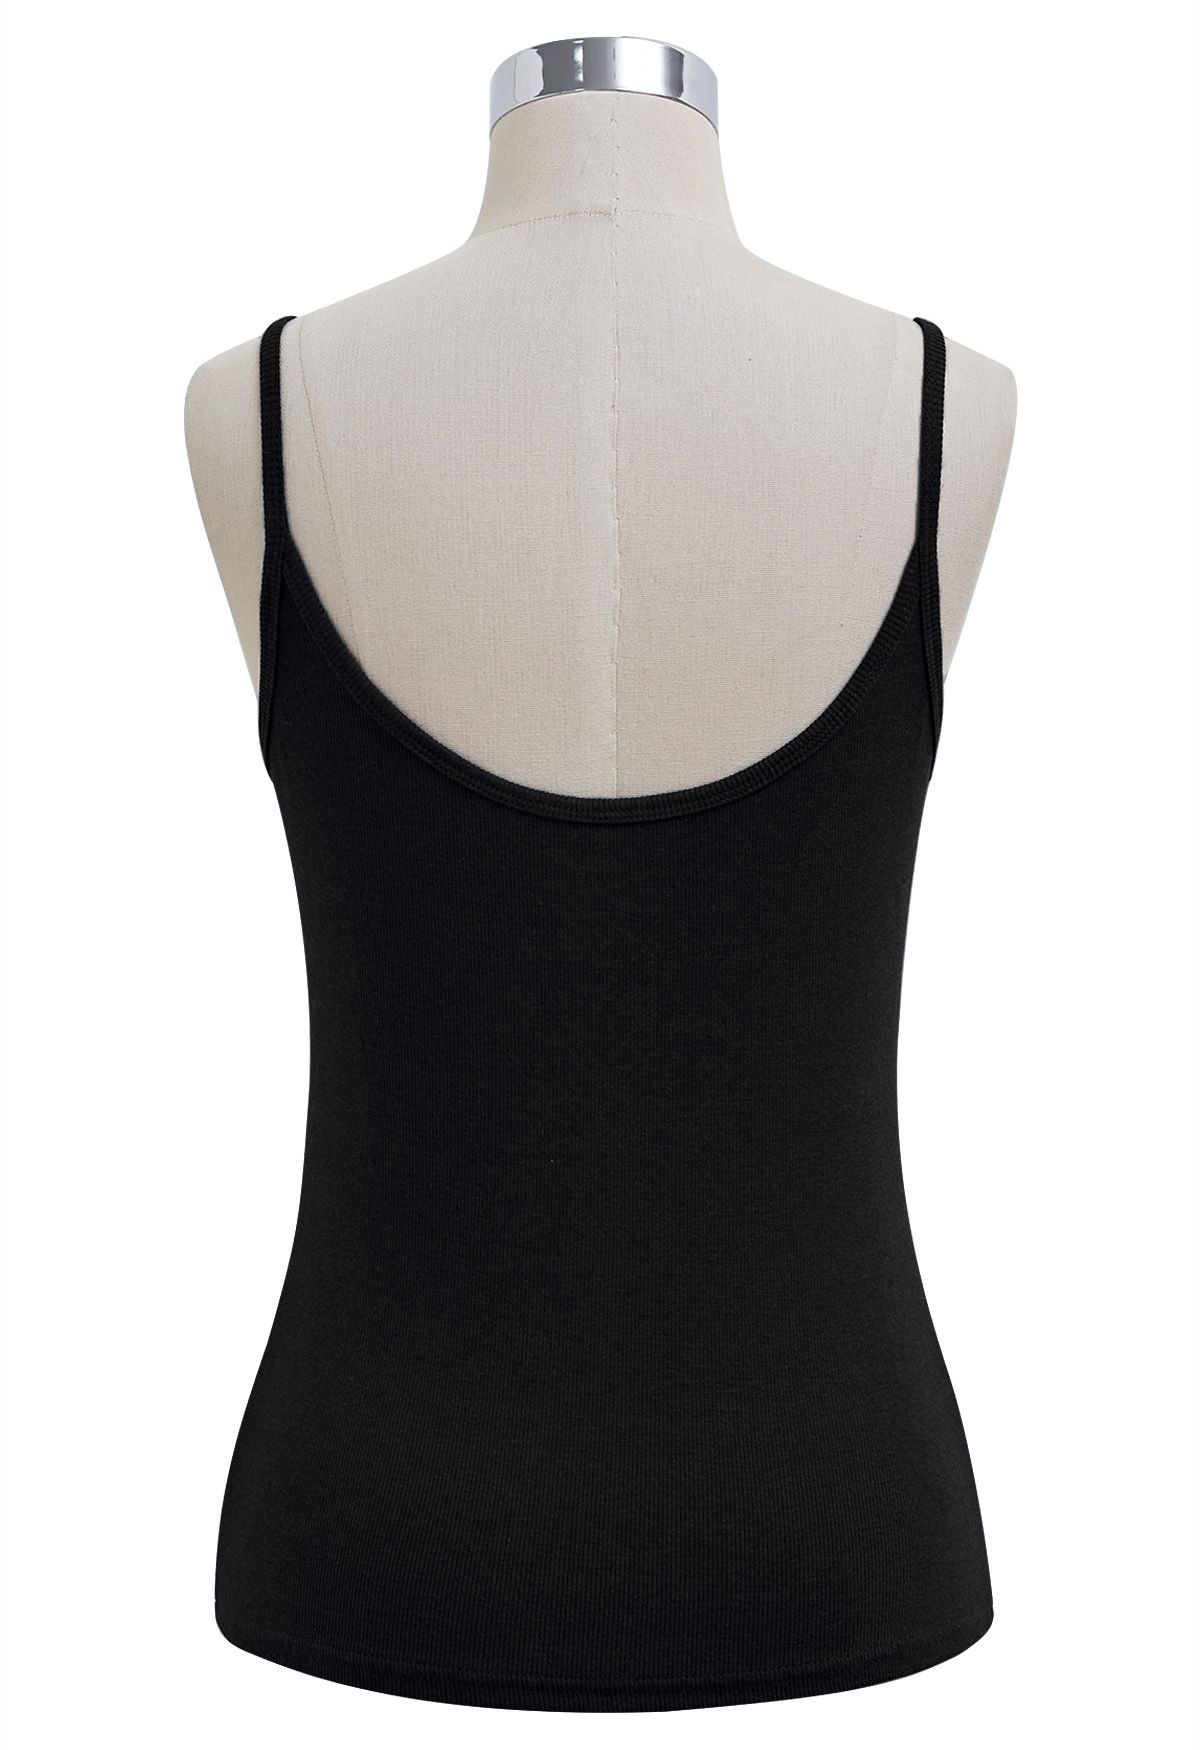 Simplicity Front Buttoned Cami Top in Black